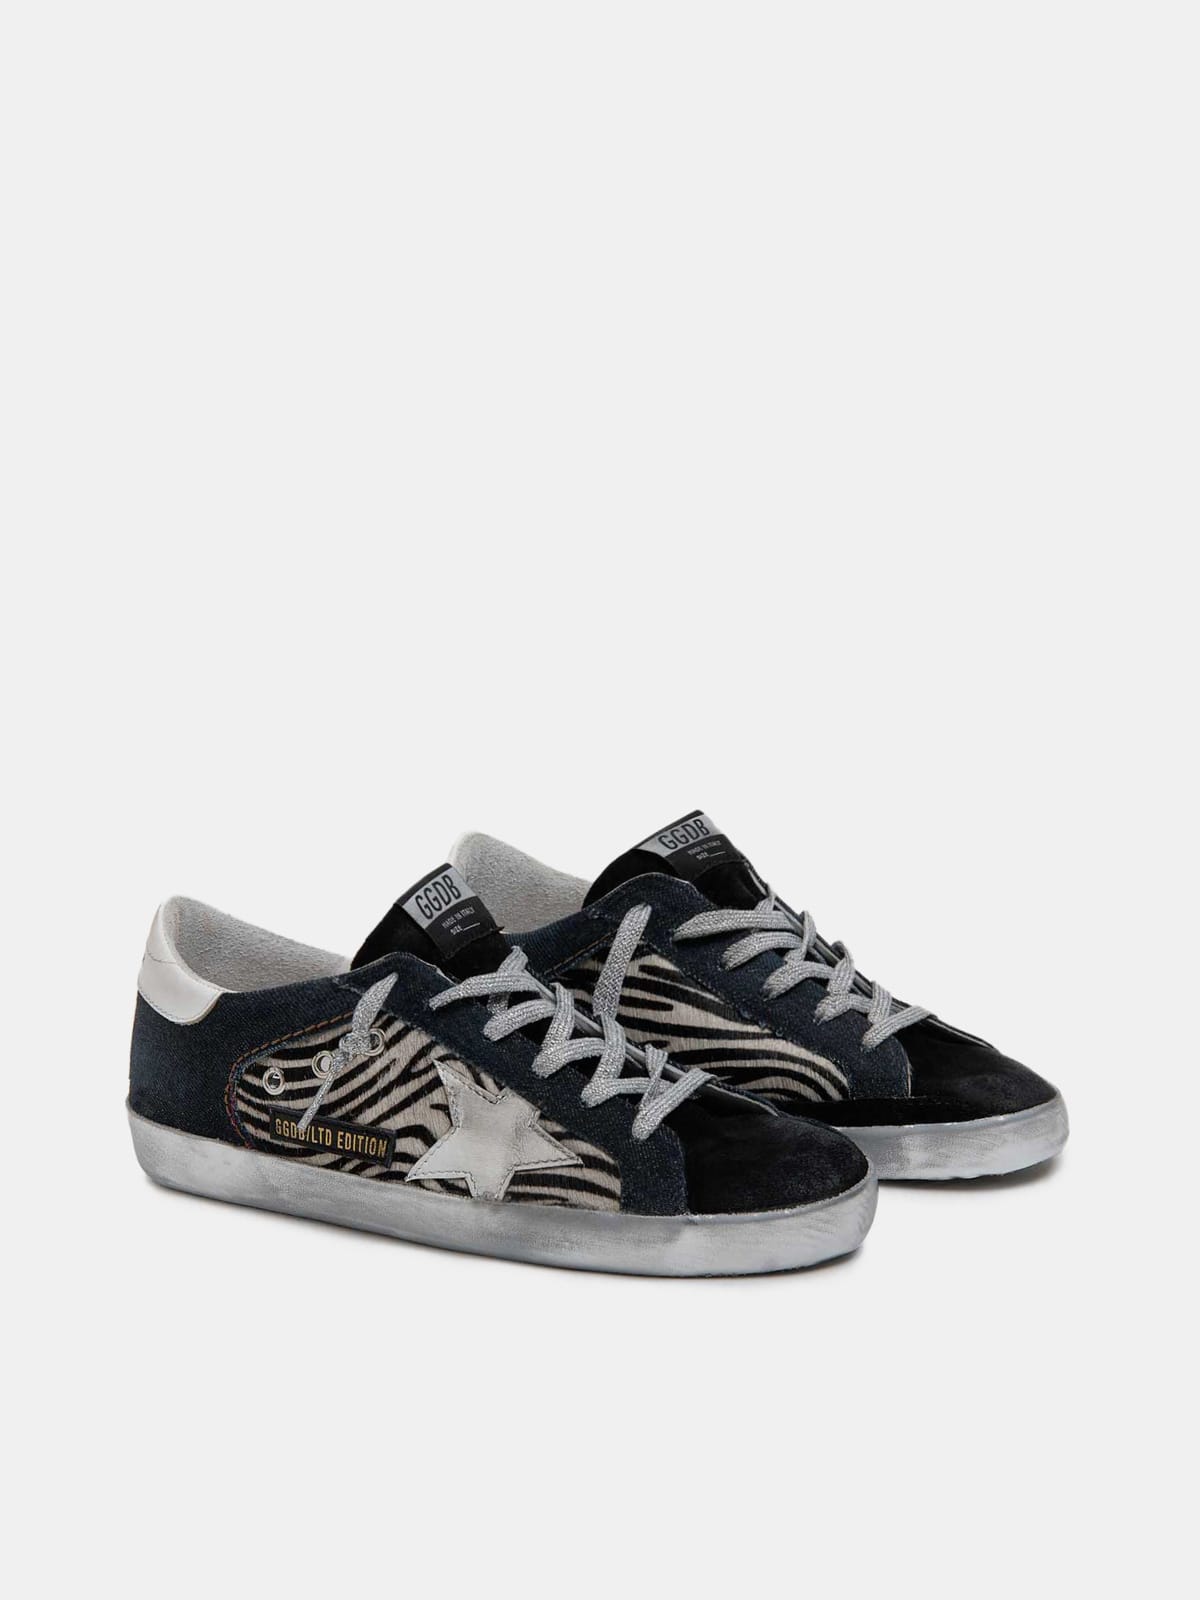 LAB Limited Edition Super-Star sneakers in denim, zebra-print pony skin and  suede | Golden Goose